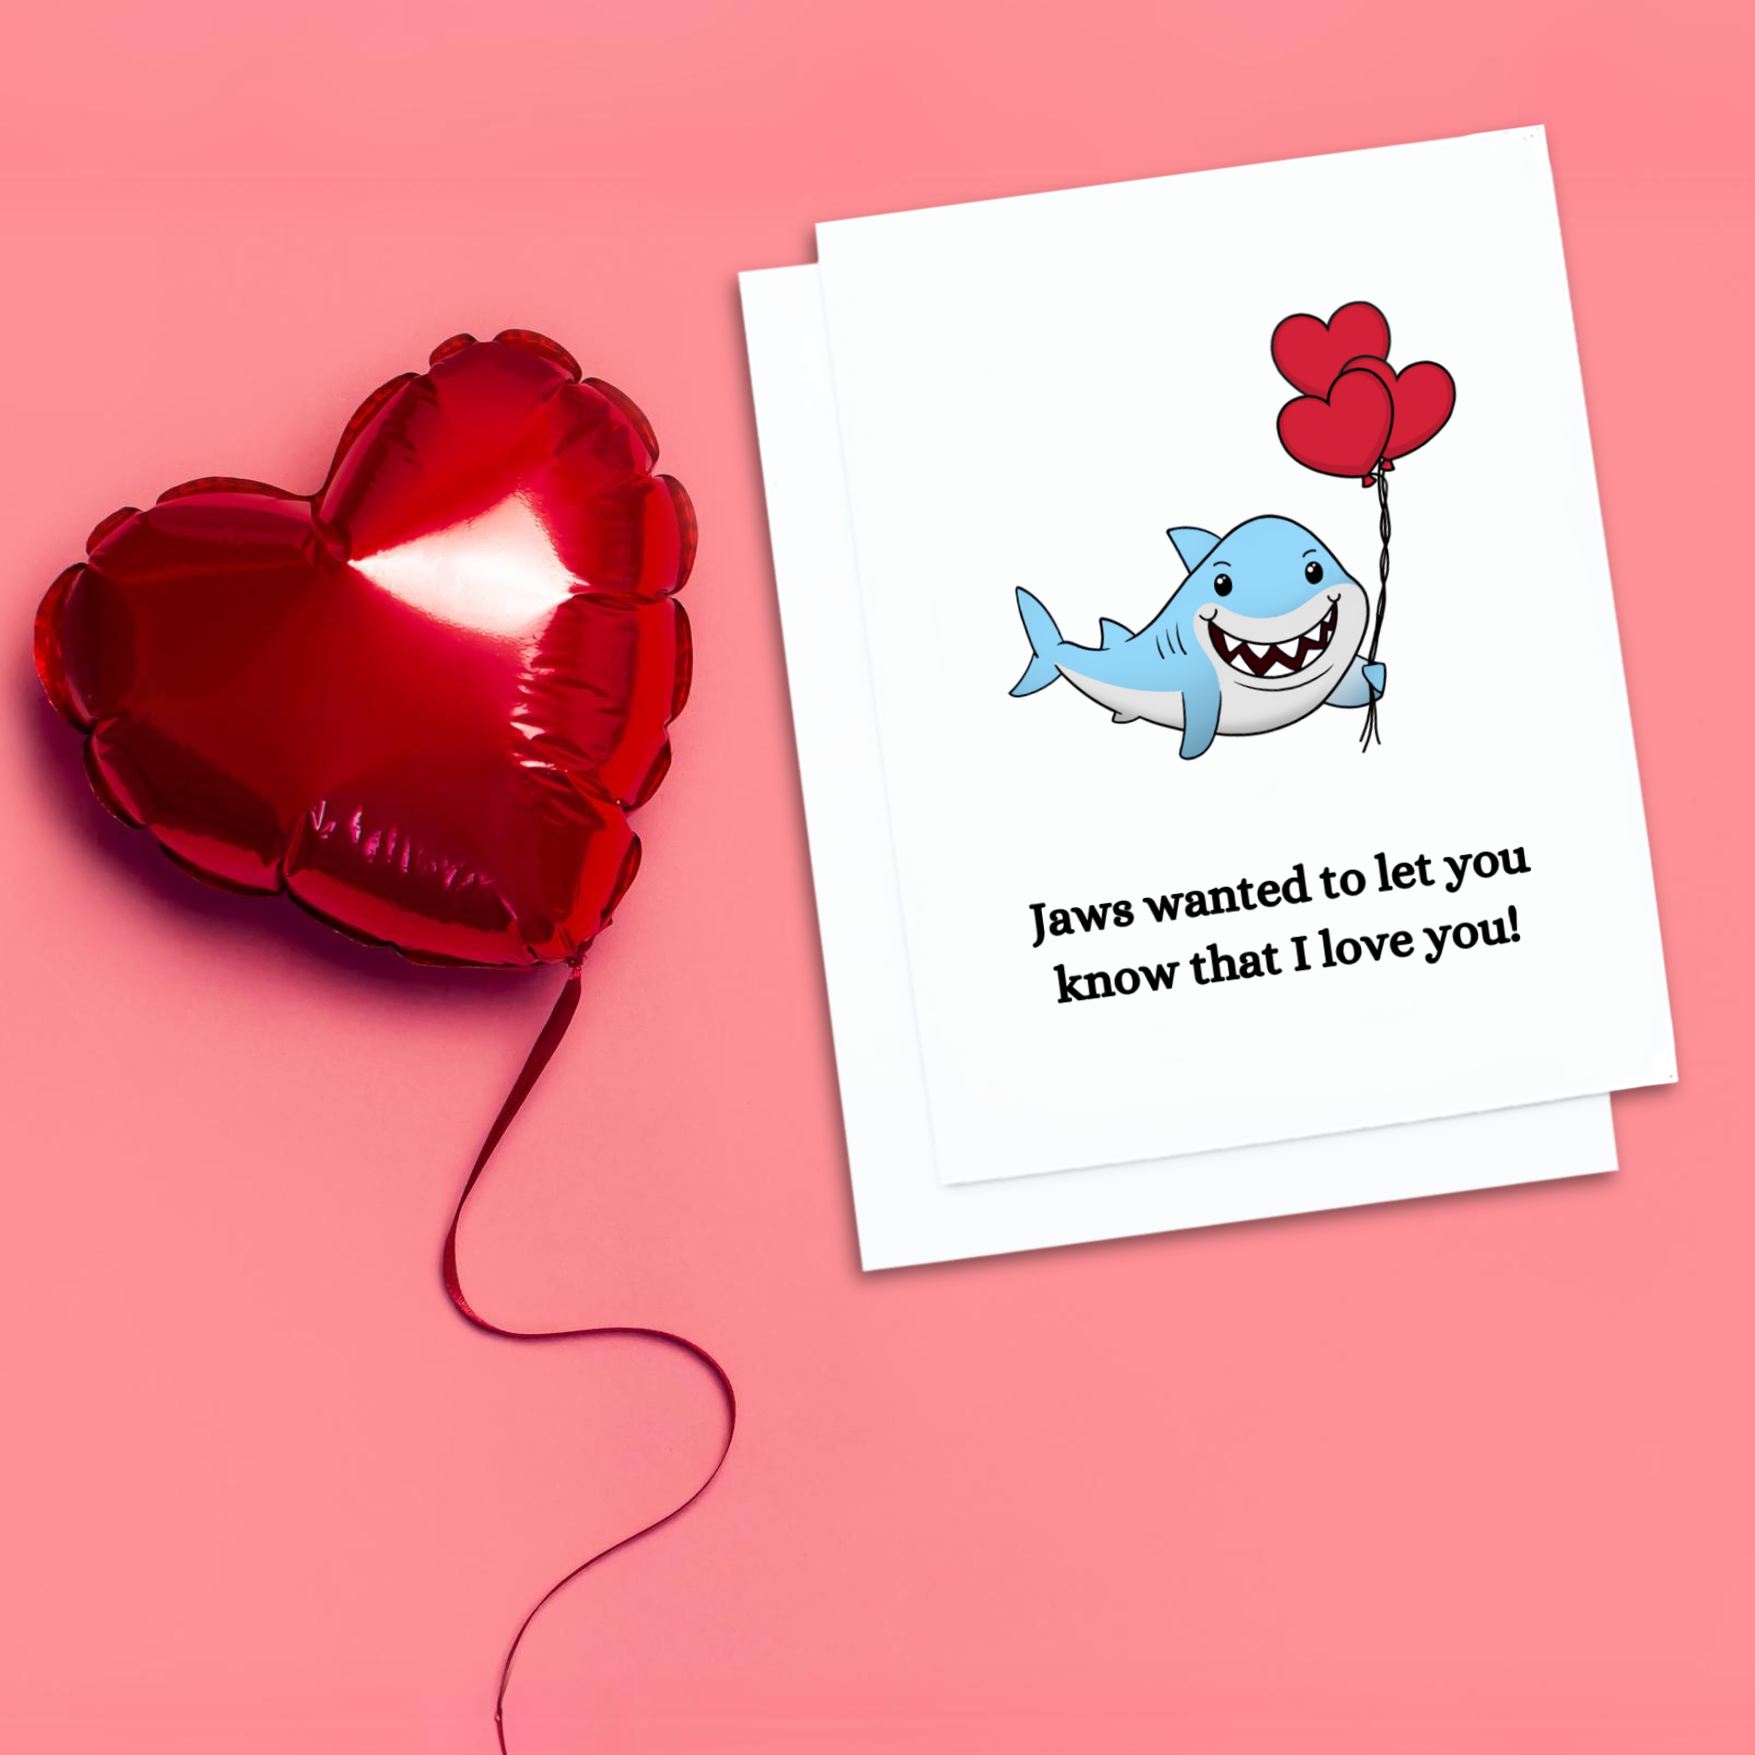 Valentines card. A smiling shark holding red balloons. text reads, Jaws wanted to let you know that I love you.